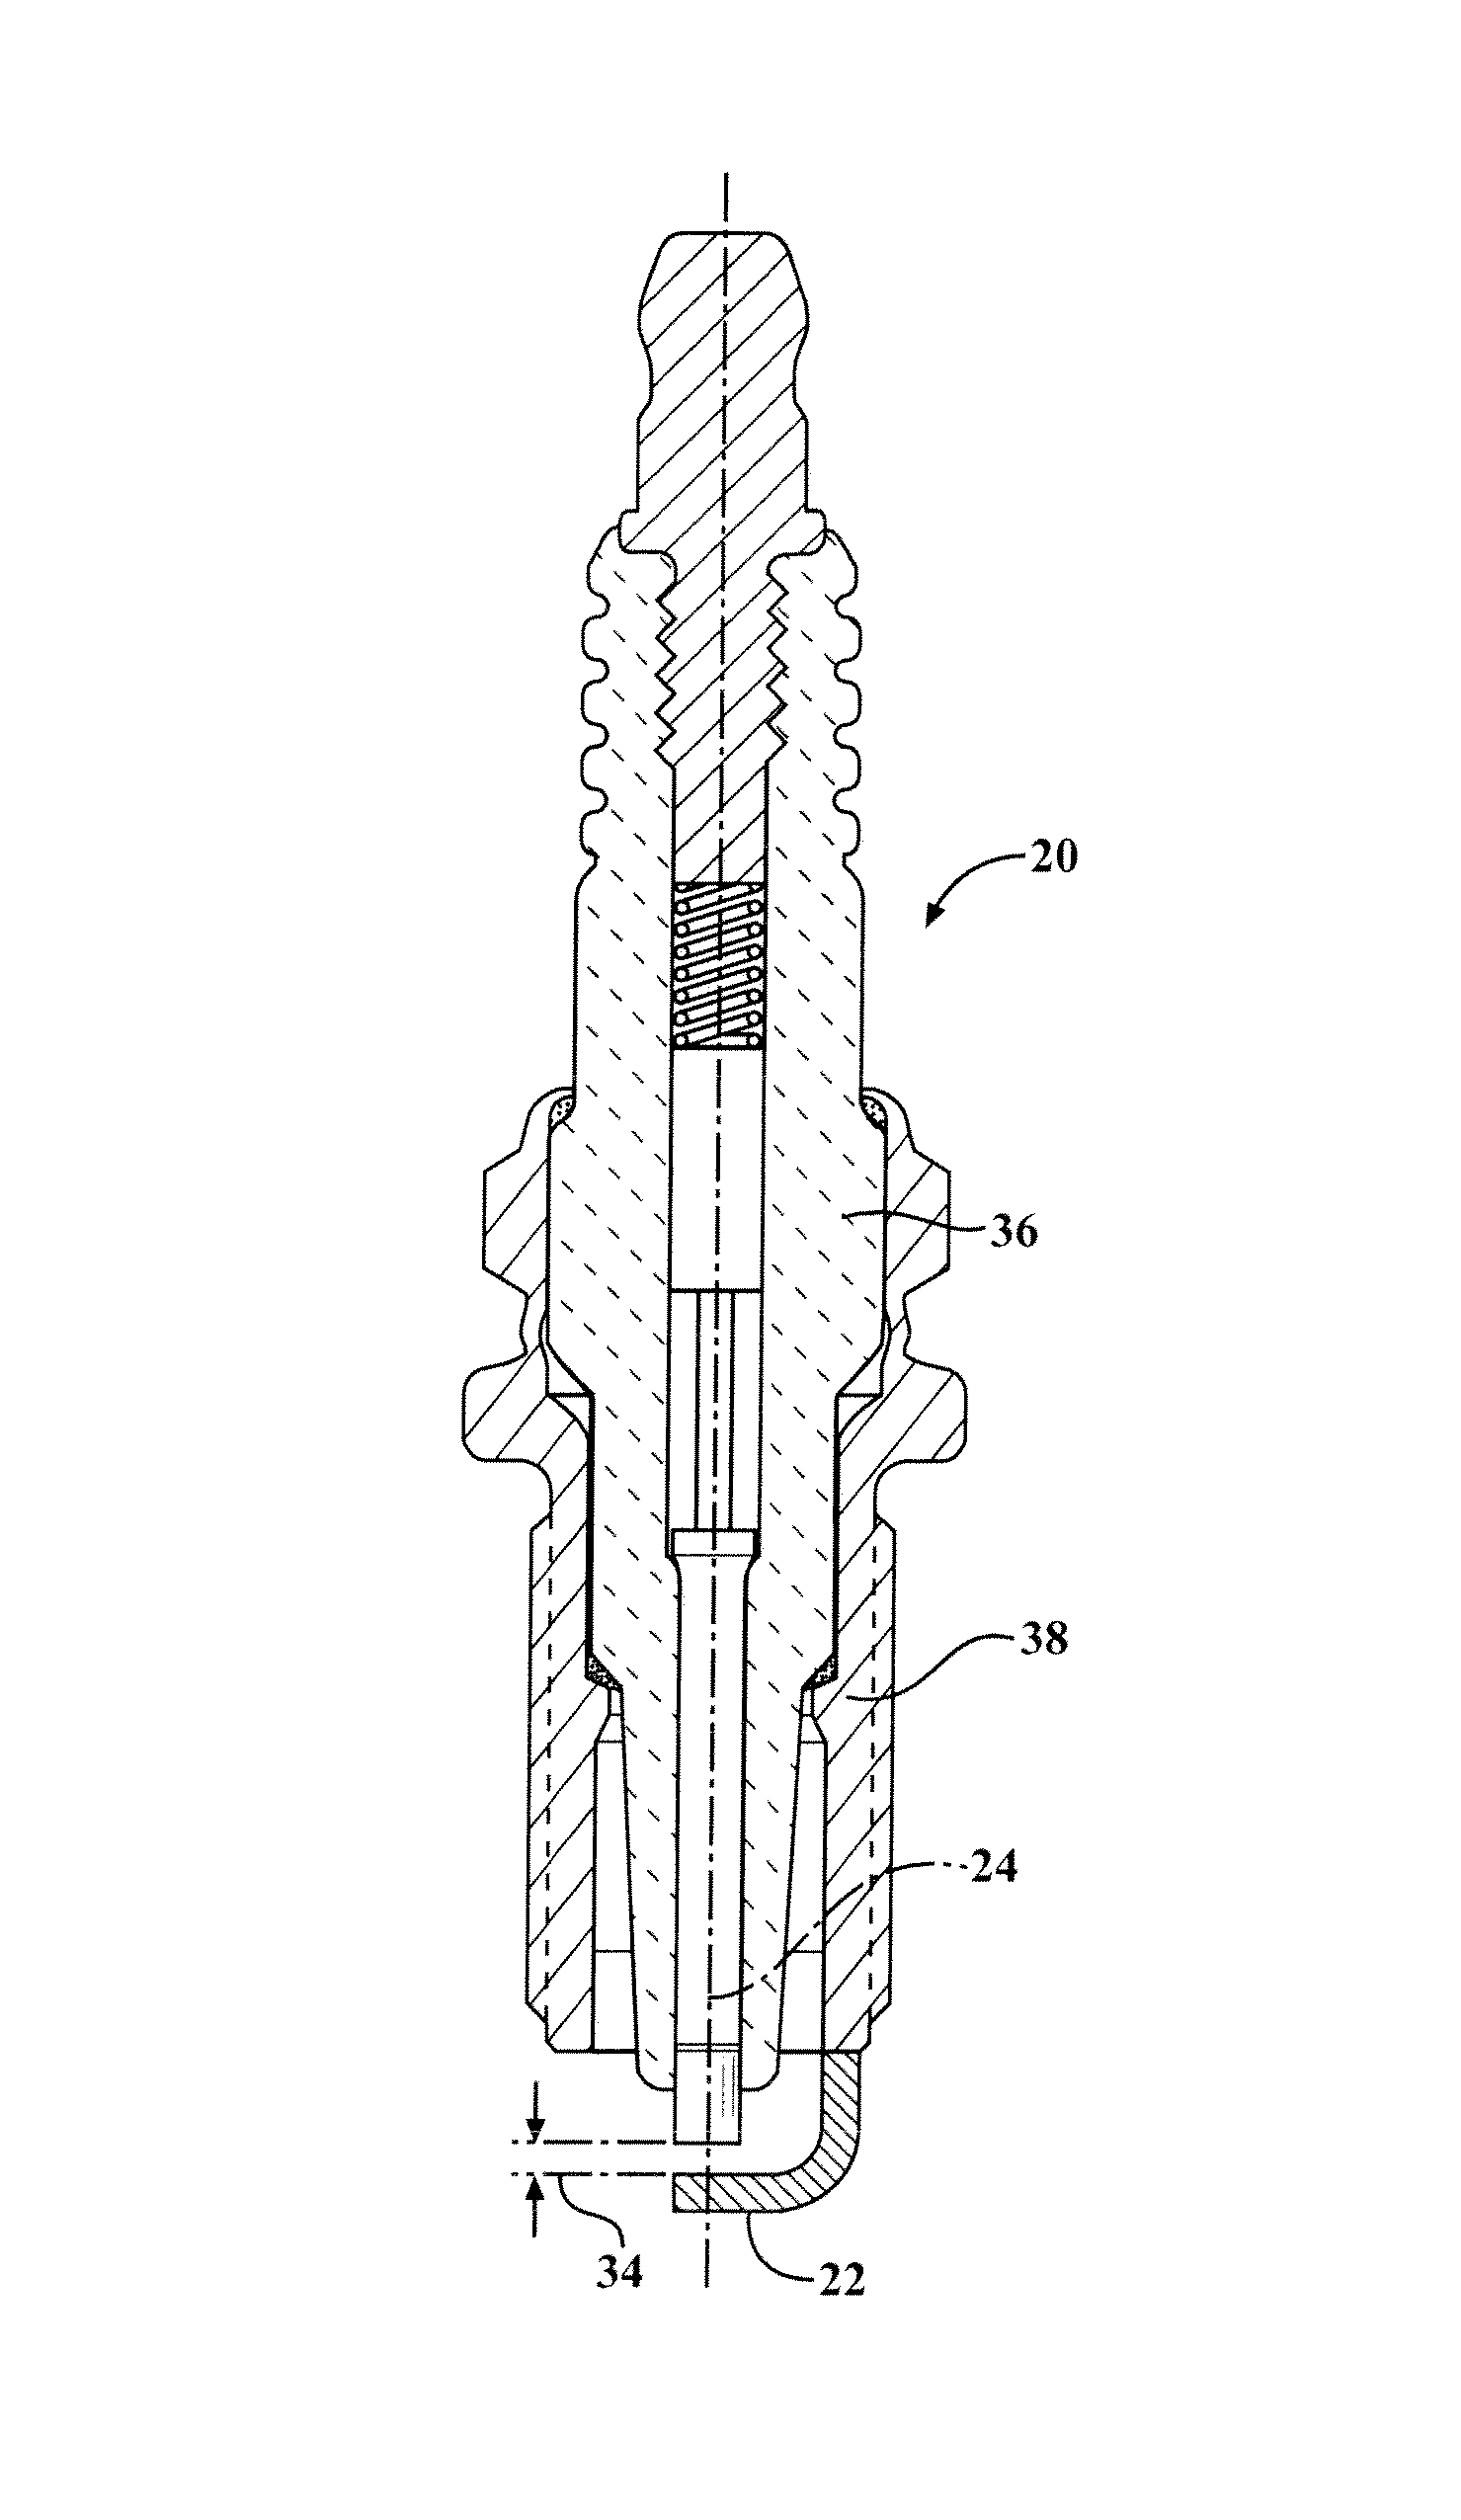 Spark plug including electrodes with low swelling rate and high corrosion resistance